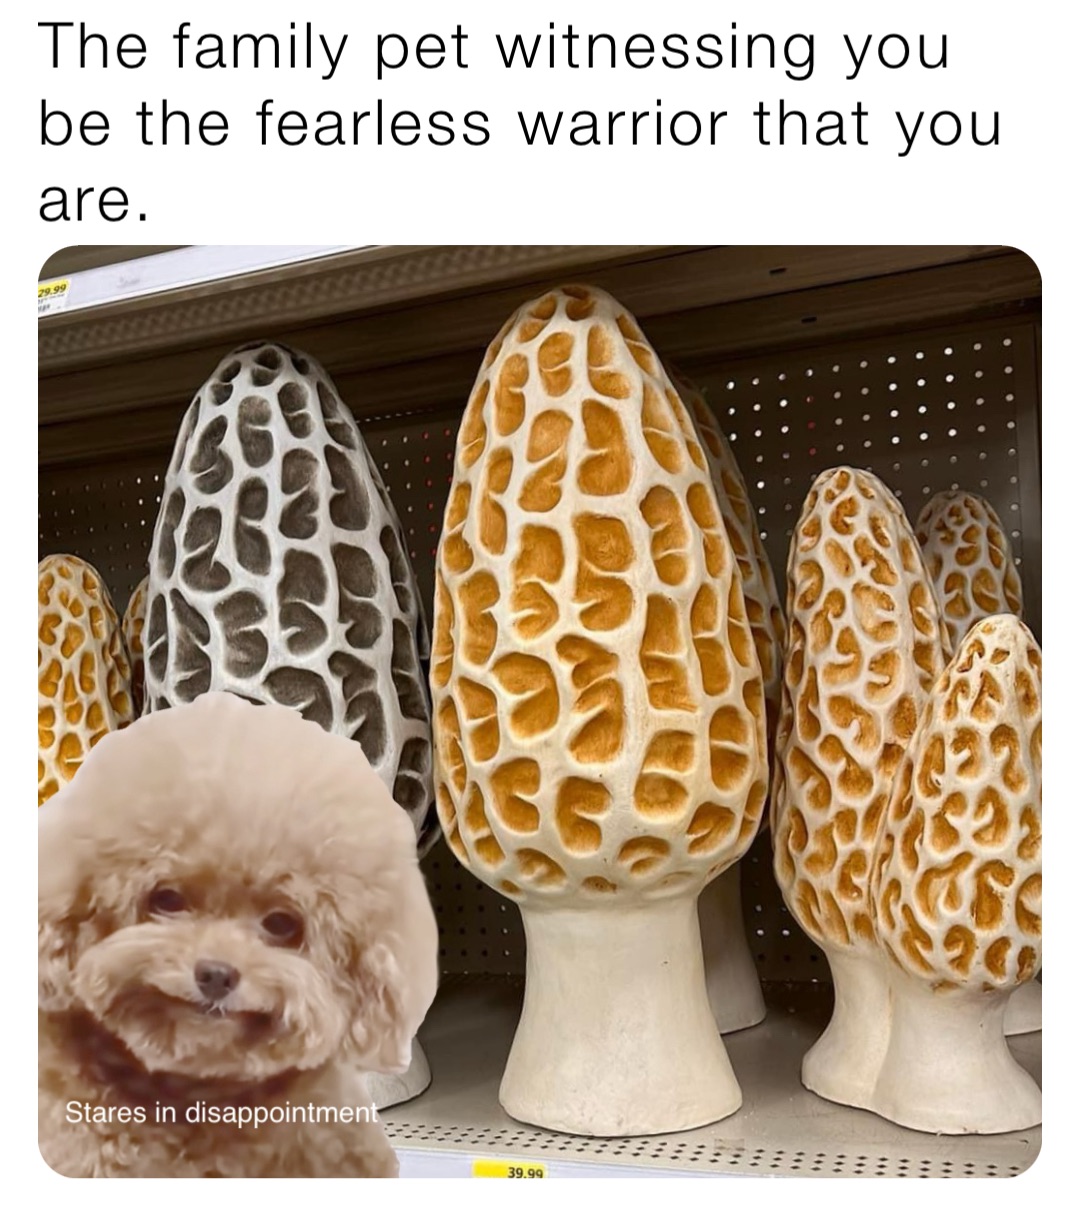 The family pet witnessing you be the fearless warrior that you are. Stares in disappointment